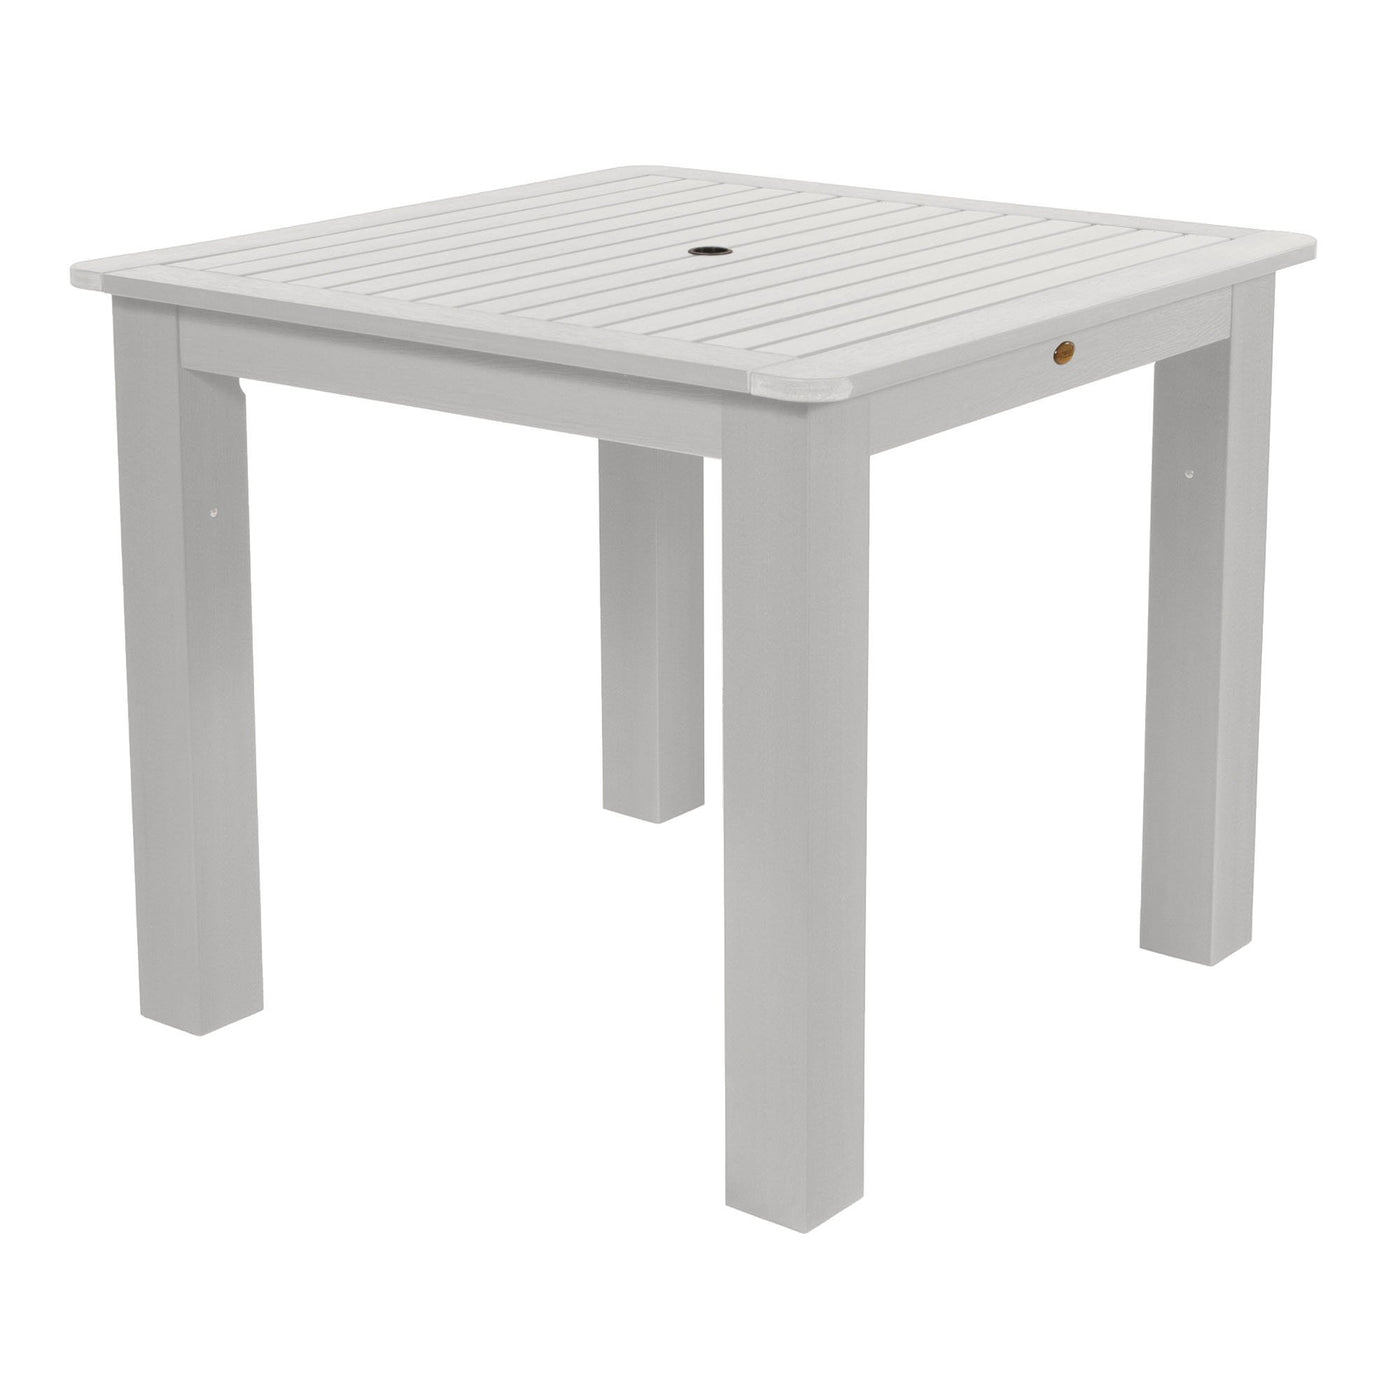 Square 42in x 42in Dining Table - Counter Height Dining Highwood USA White 